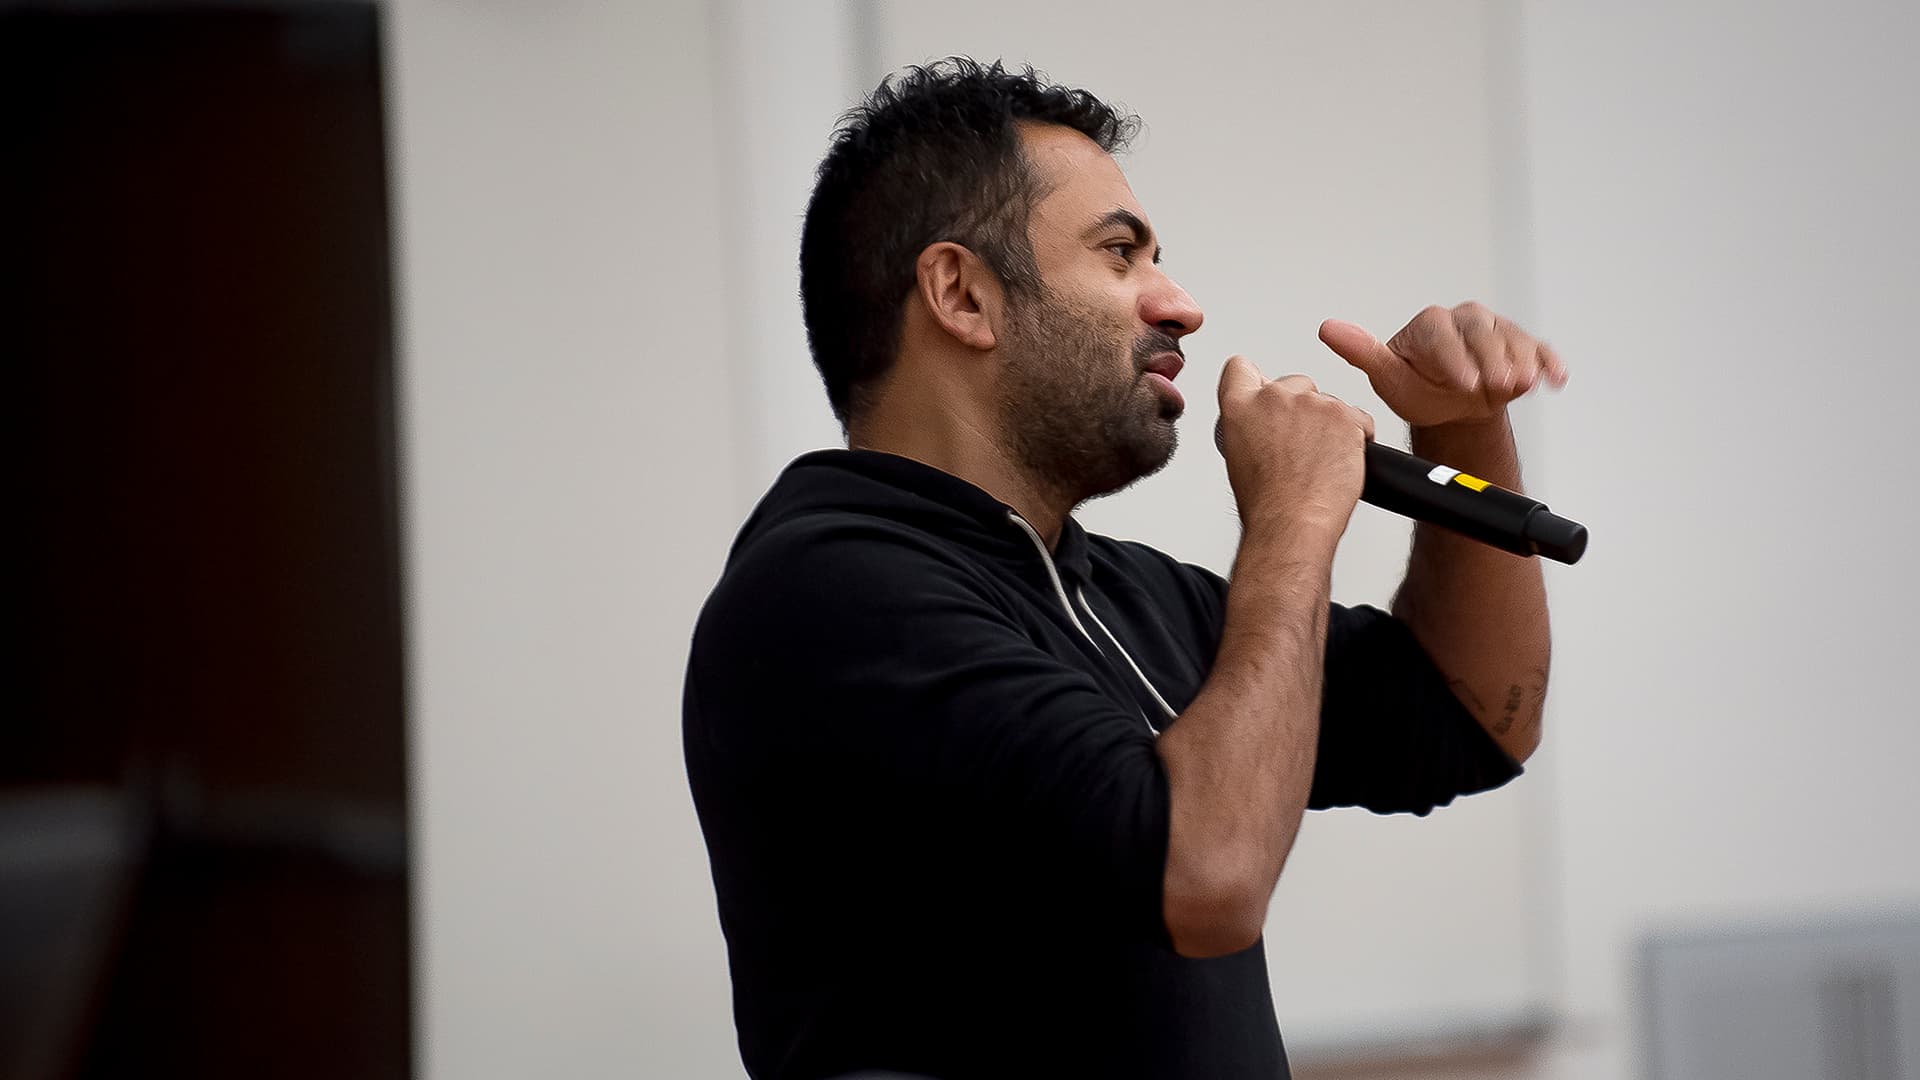 Comedian Kal Penn appeared Thursday on campus to present an episode of his sitcom "Sunnyside" and discuss diversity and Asian American representation in the entertainment industry.